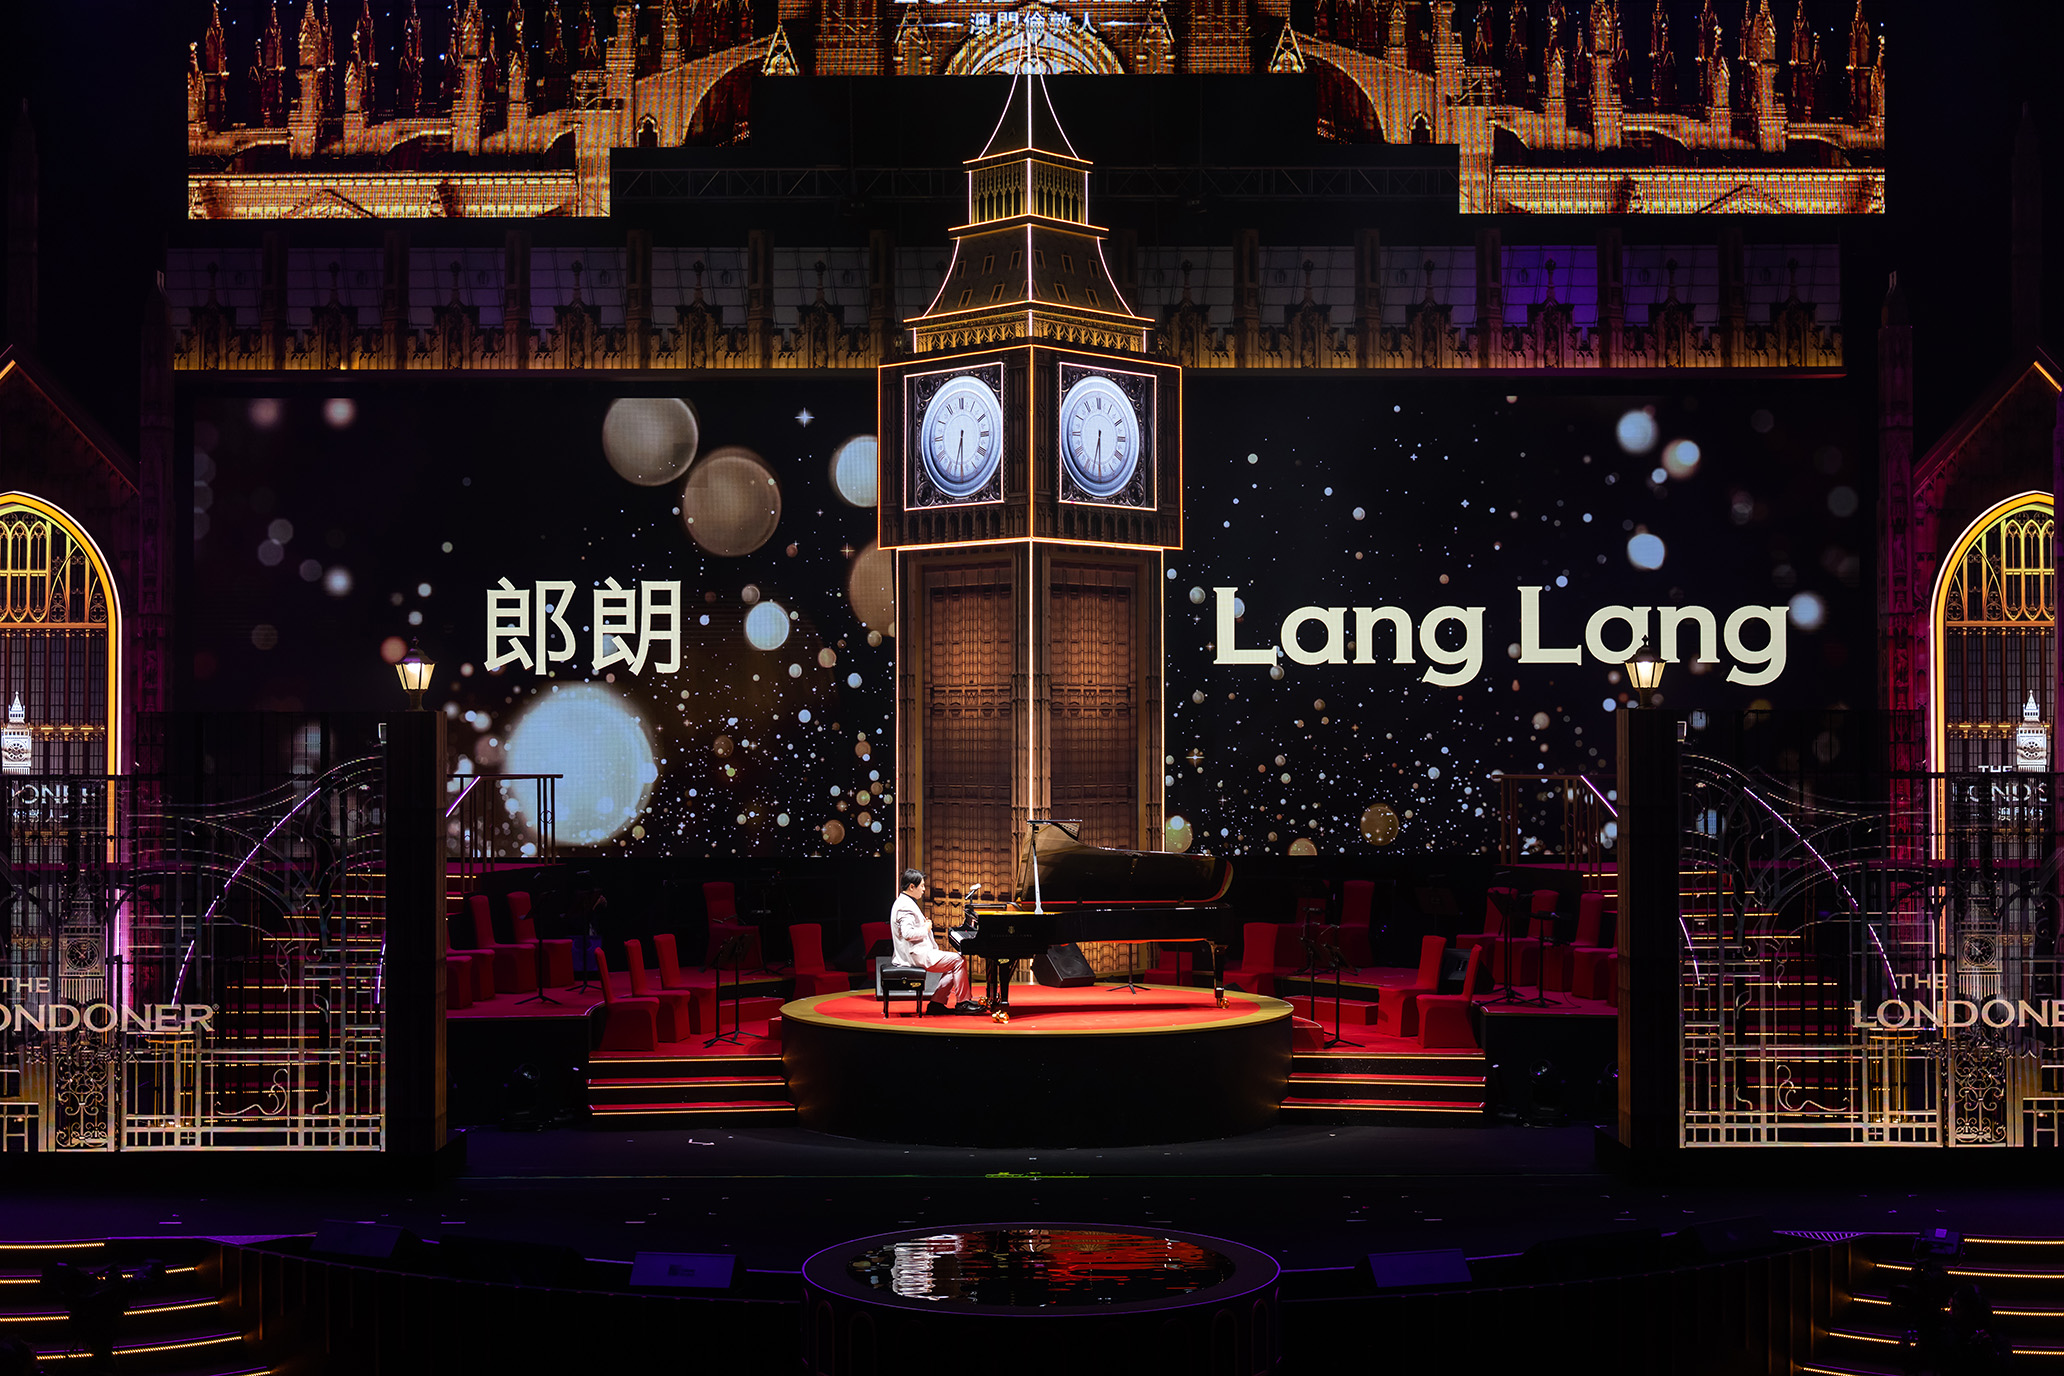 China’s globally renowned piano virtuoso Lang Lang performs during The Londoner Macao Grand Celebration at The Londoner Arena Thursday.